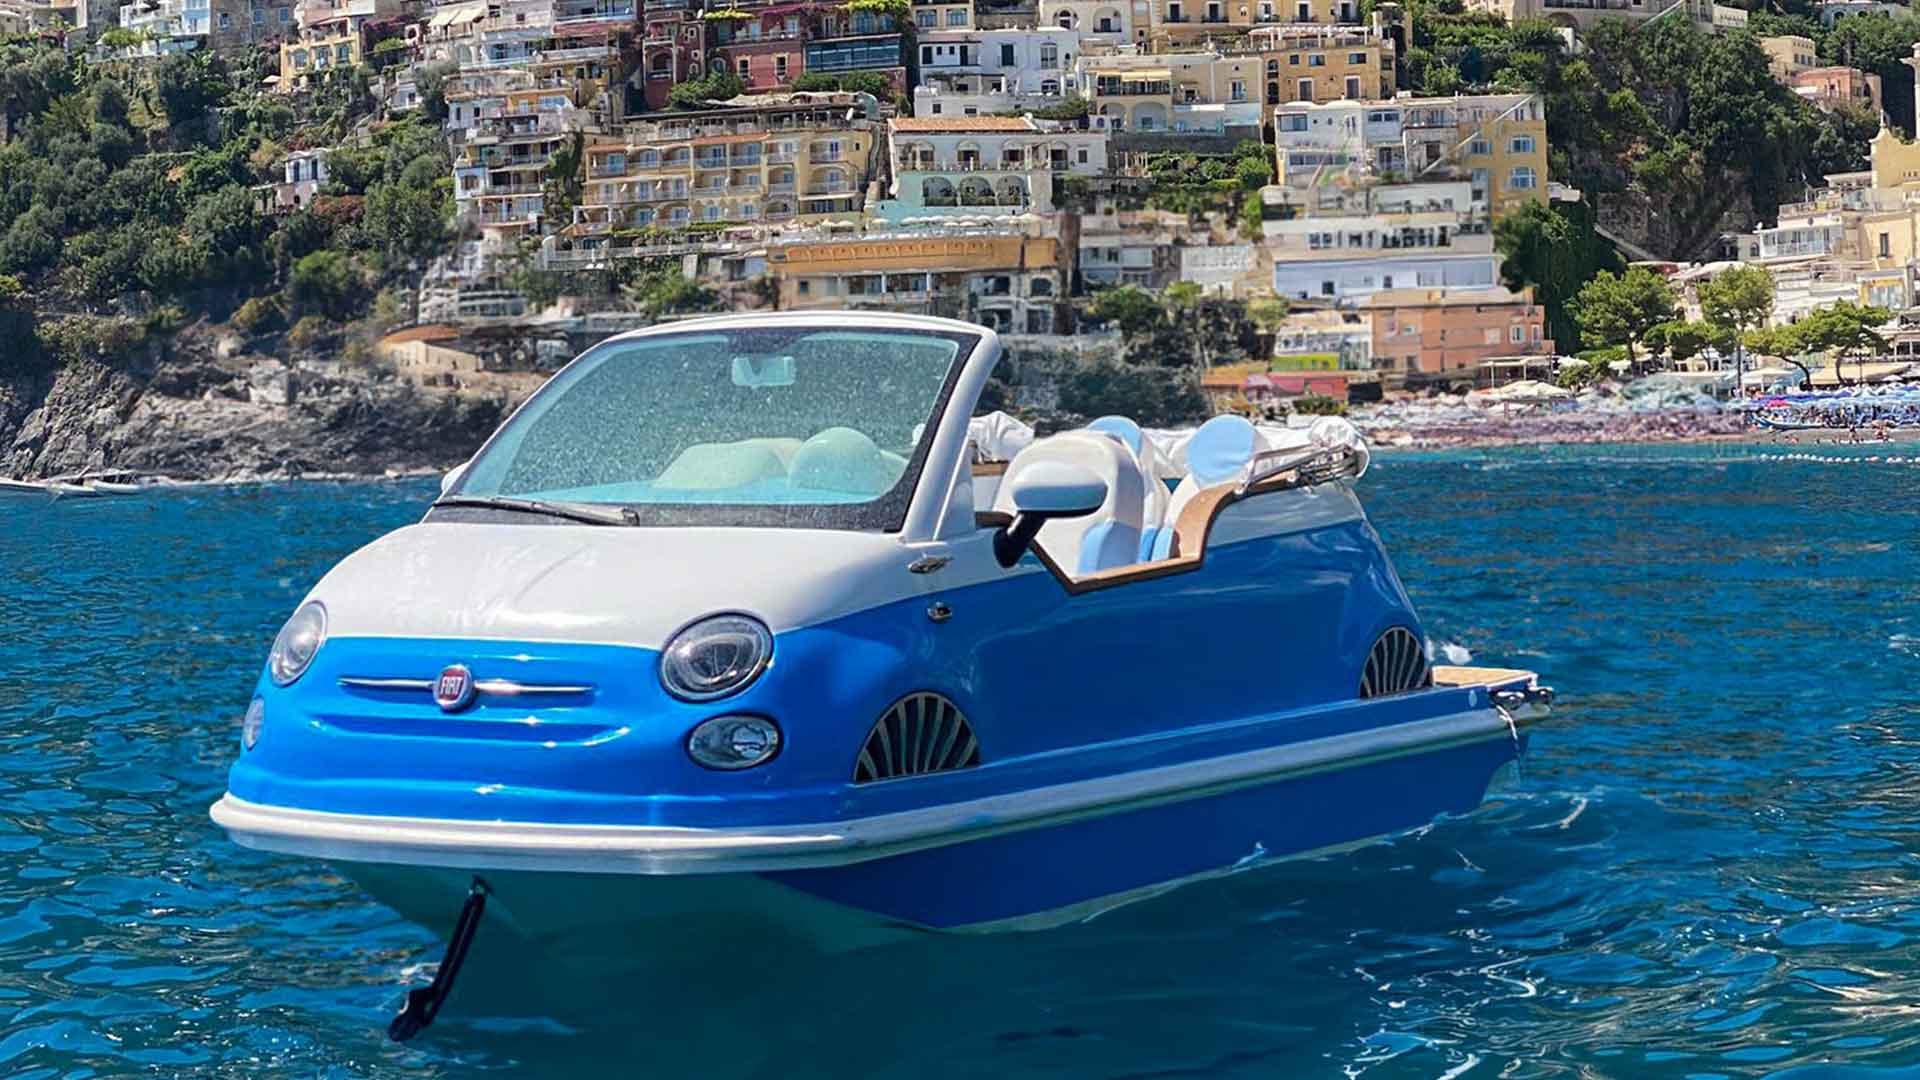 Fiat 500 in front of the boat